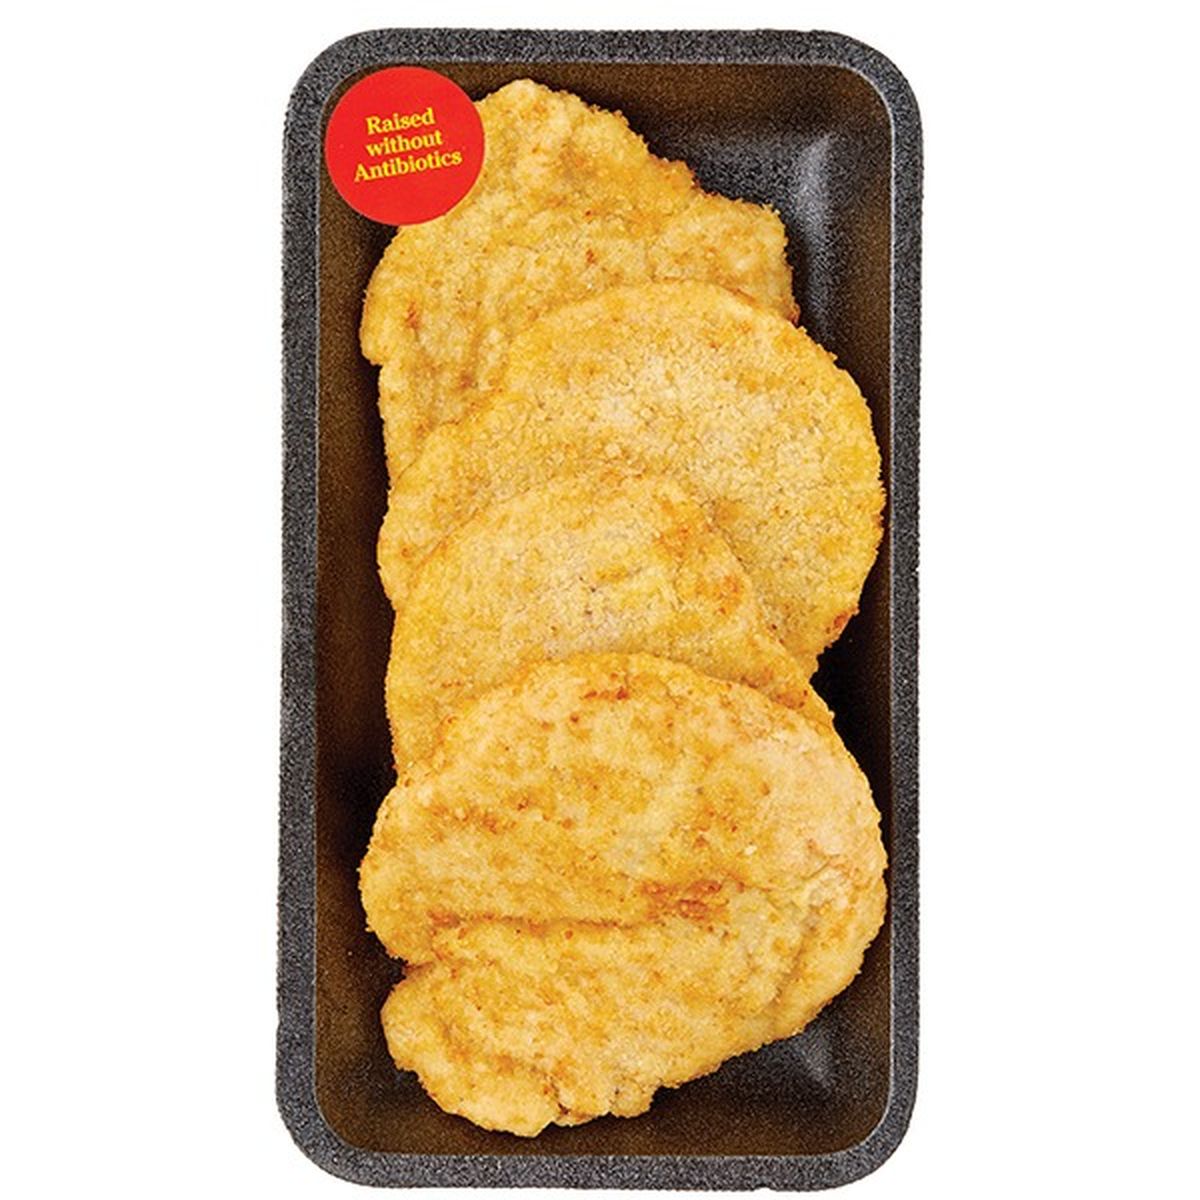 Calories in Wegmans Ready to Cook Breaded Chicken Cutlets, 4 Pack